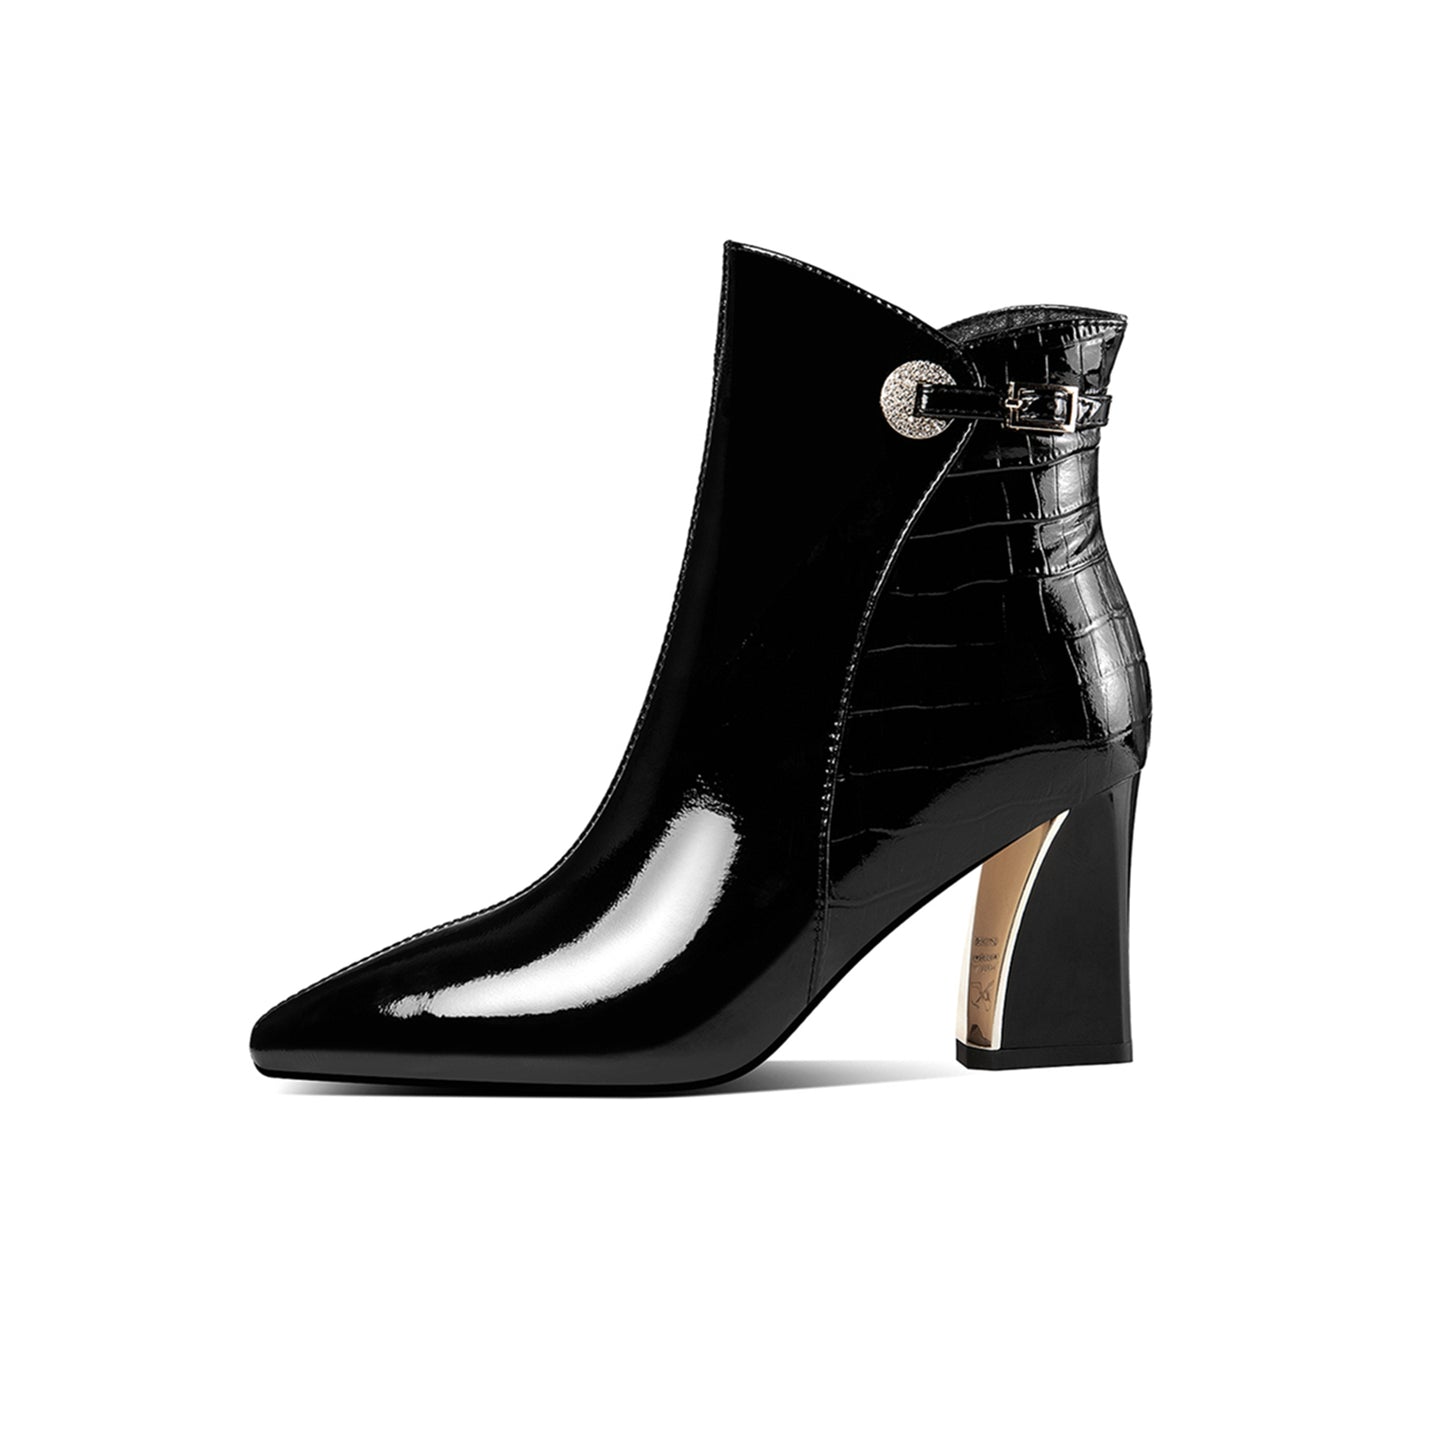 TinaCus Glossy Patent Leather Women's Handmade Chunky Heel Pointed Toe Side zip Up Ankle Booties with Exquisite Buckle Decor